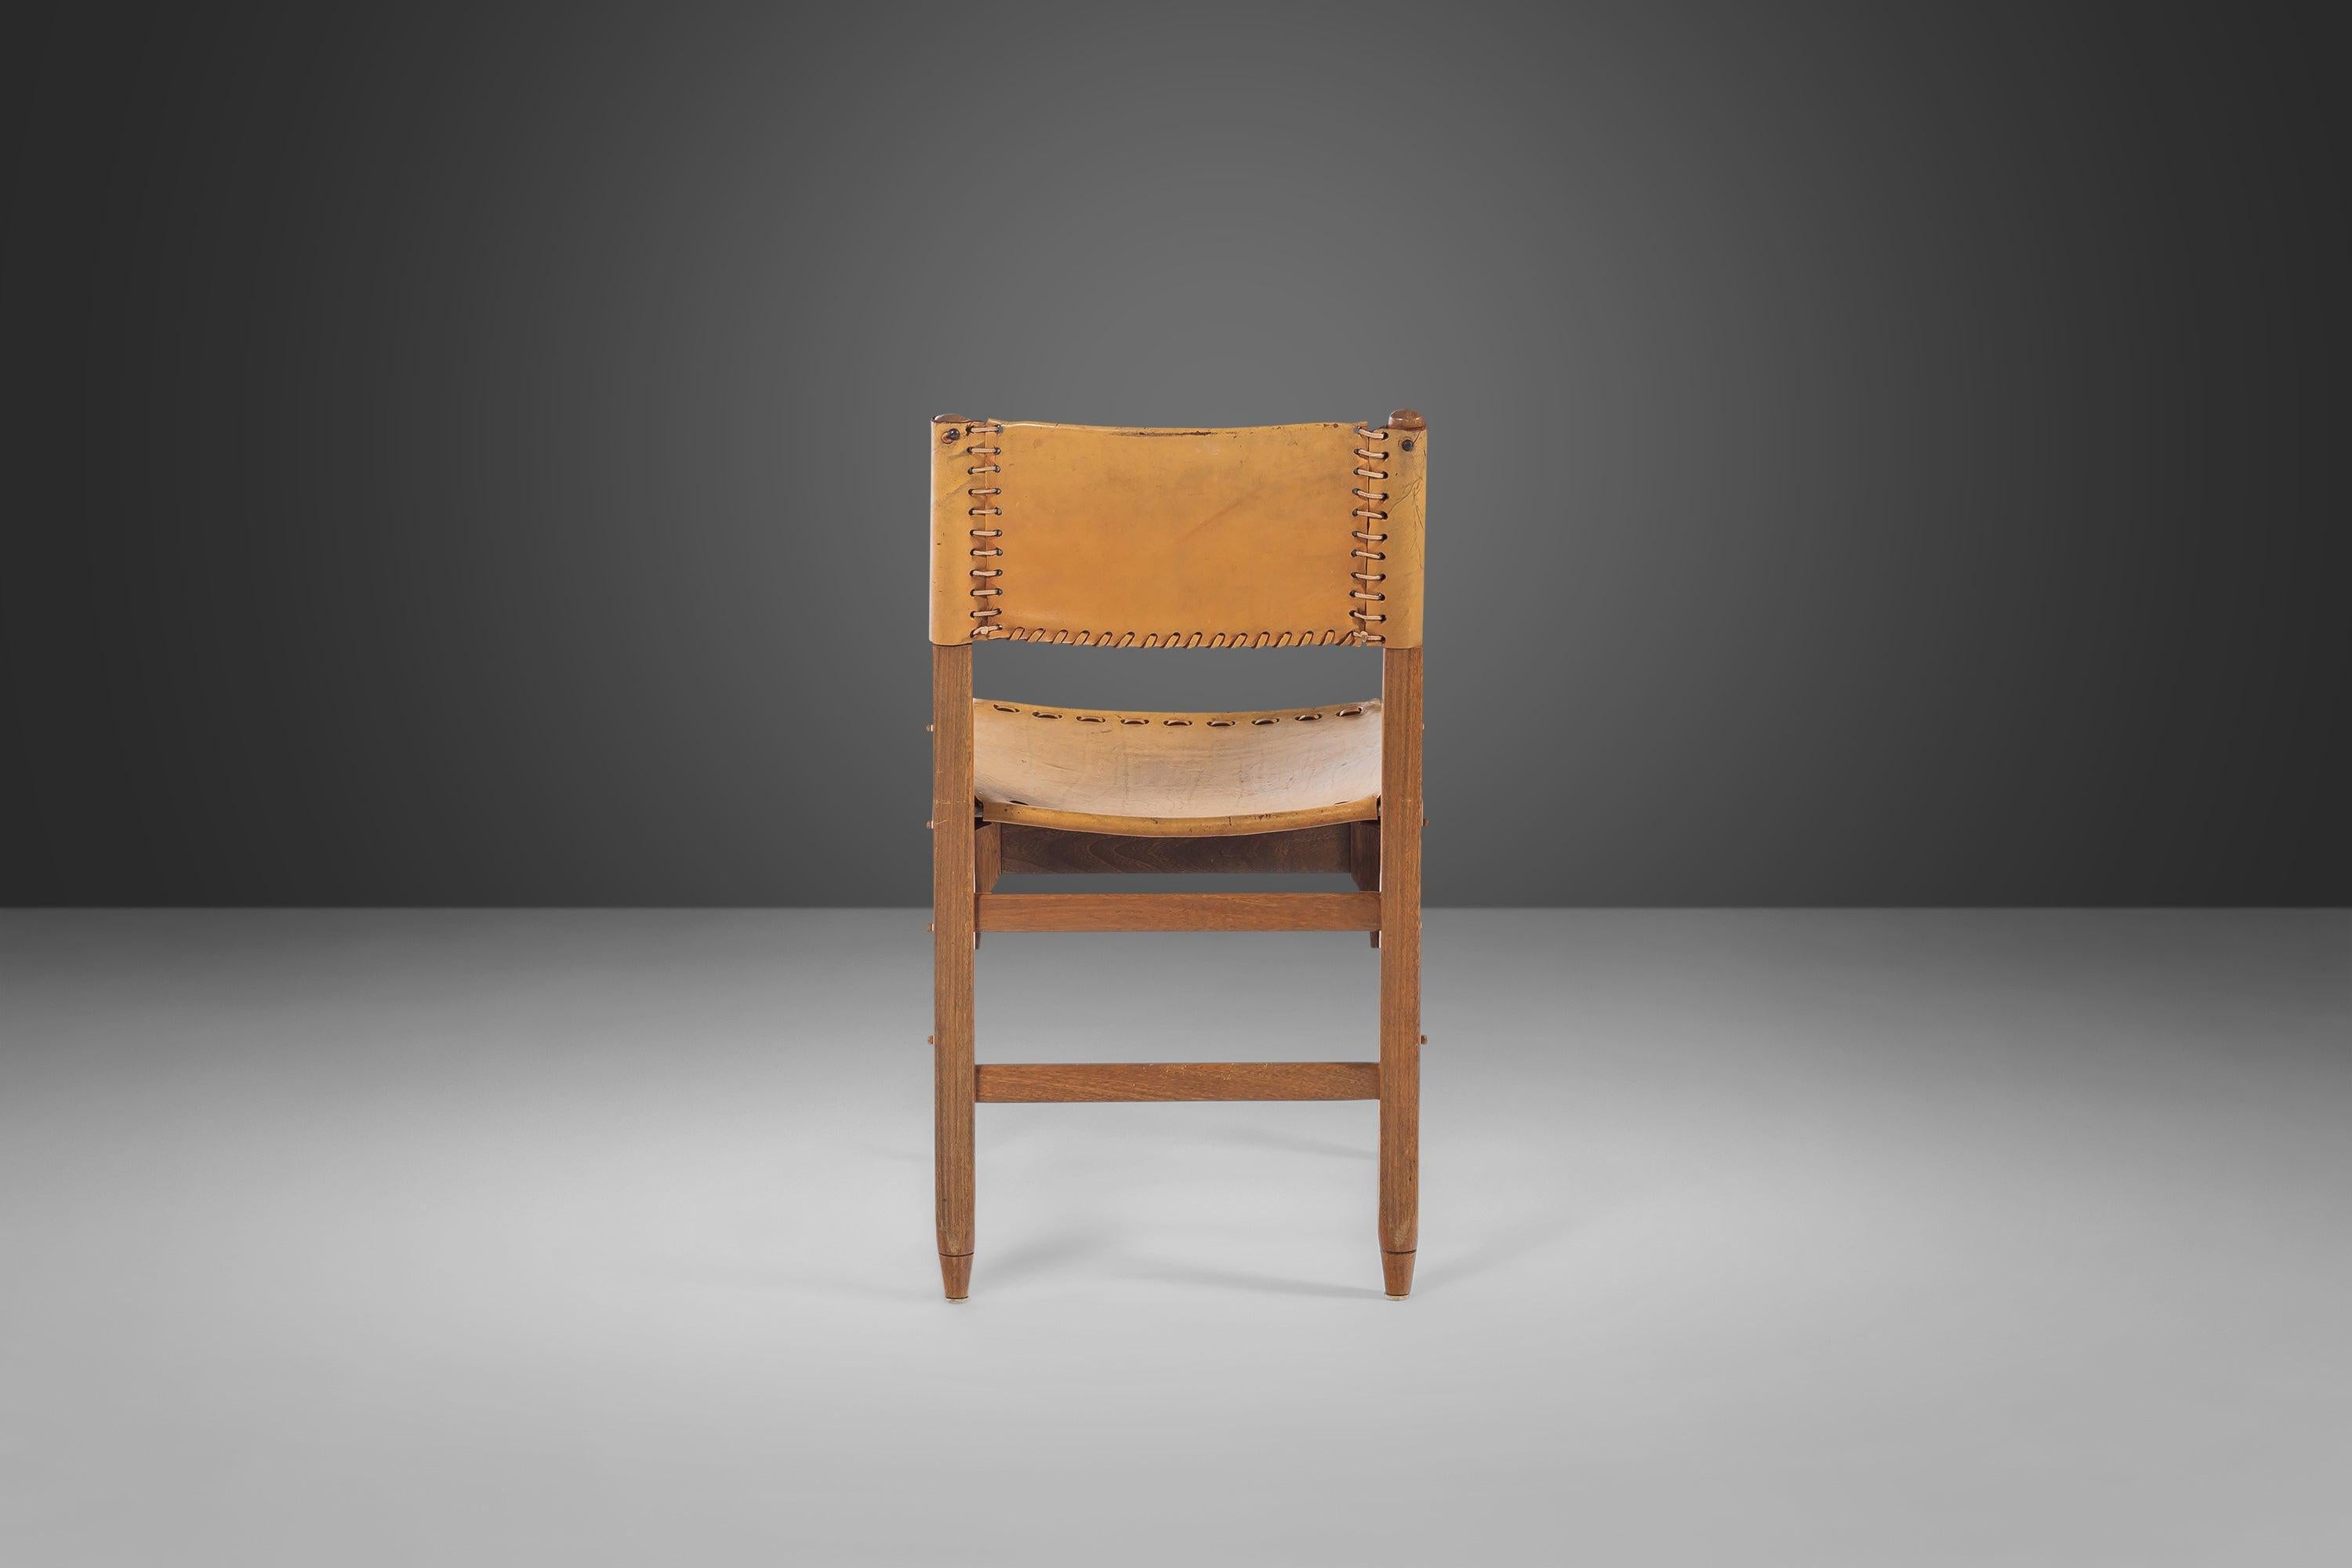 Tanned Saddle Leather Side Chair Designed by Biermann Werner for Arte Sano, 1960 For Sale 1